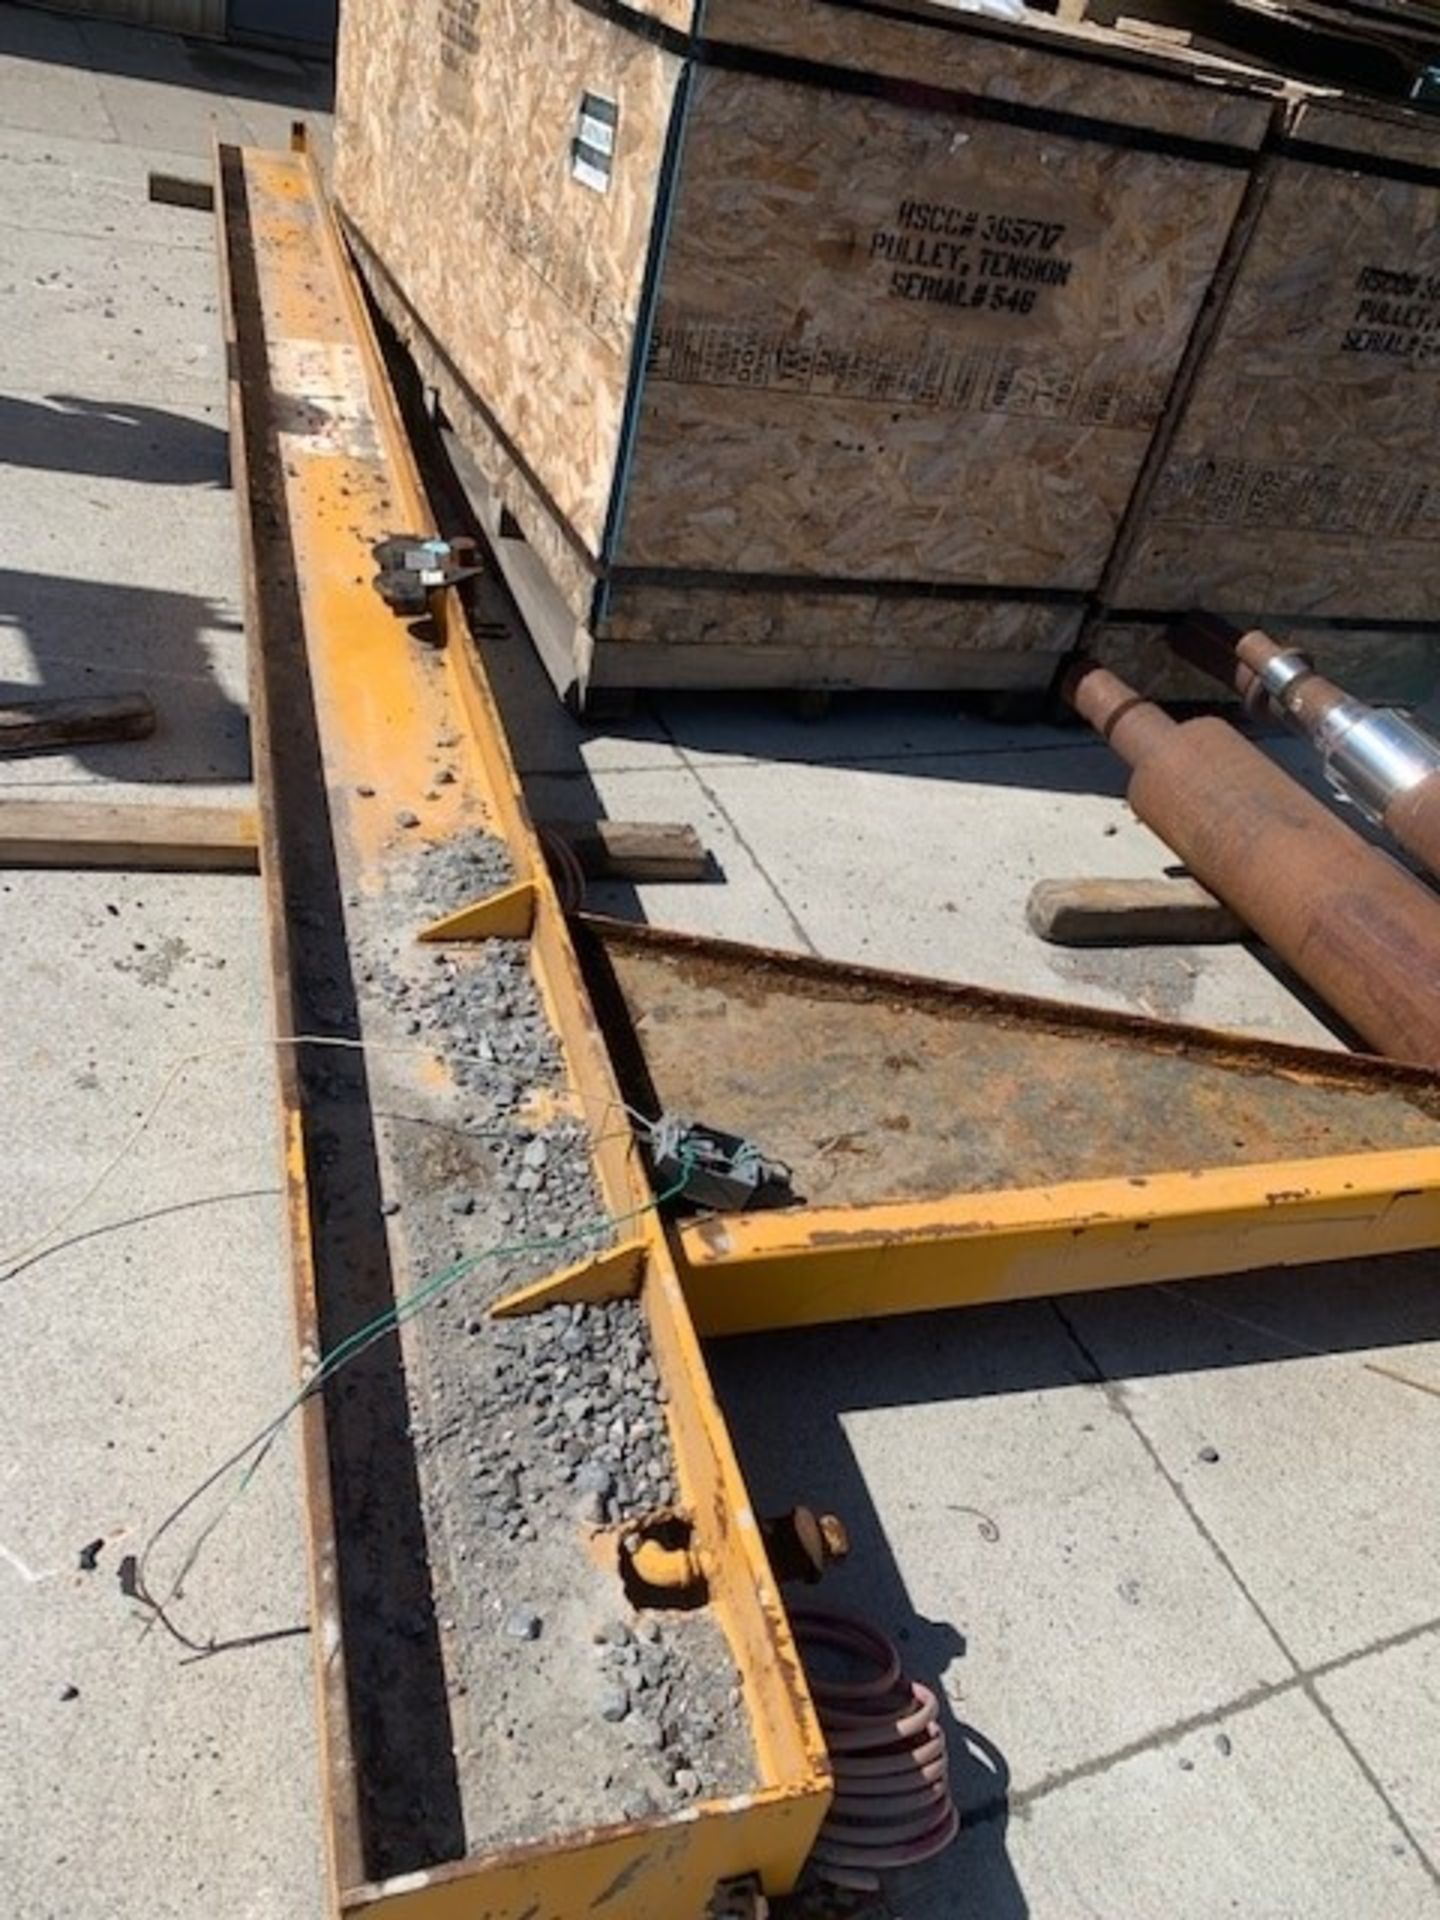 1-TON JIB CRANE FRAME (NO HOIST) (NOTE: PICKUP BY APPOINTMENT ONLY) (LOCATED IN GRIMSBY, ON)